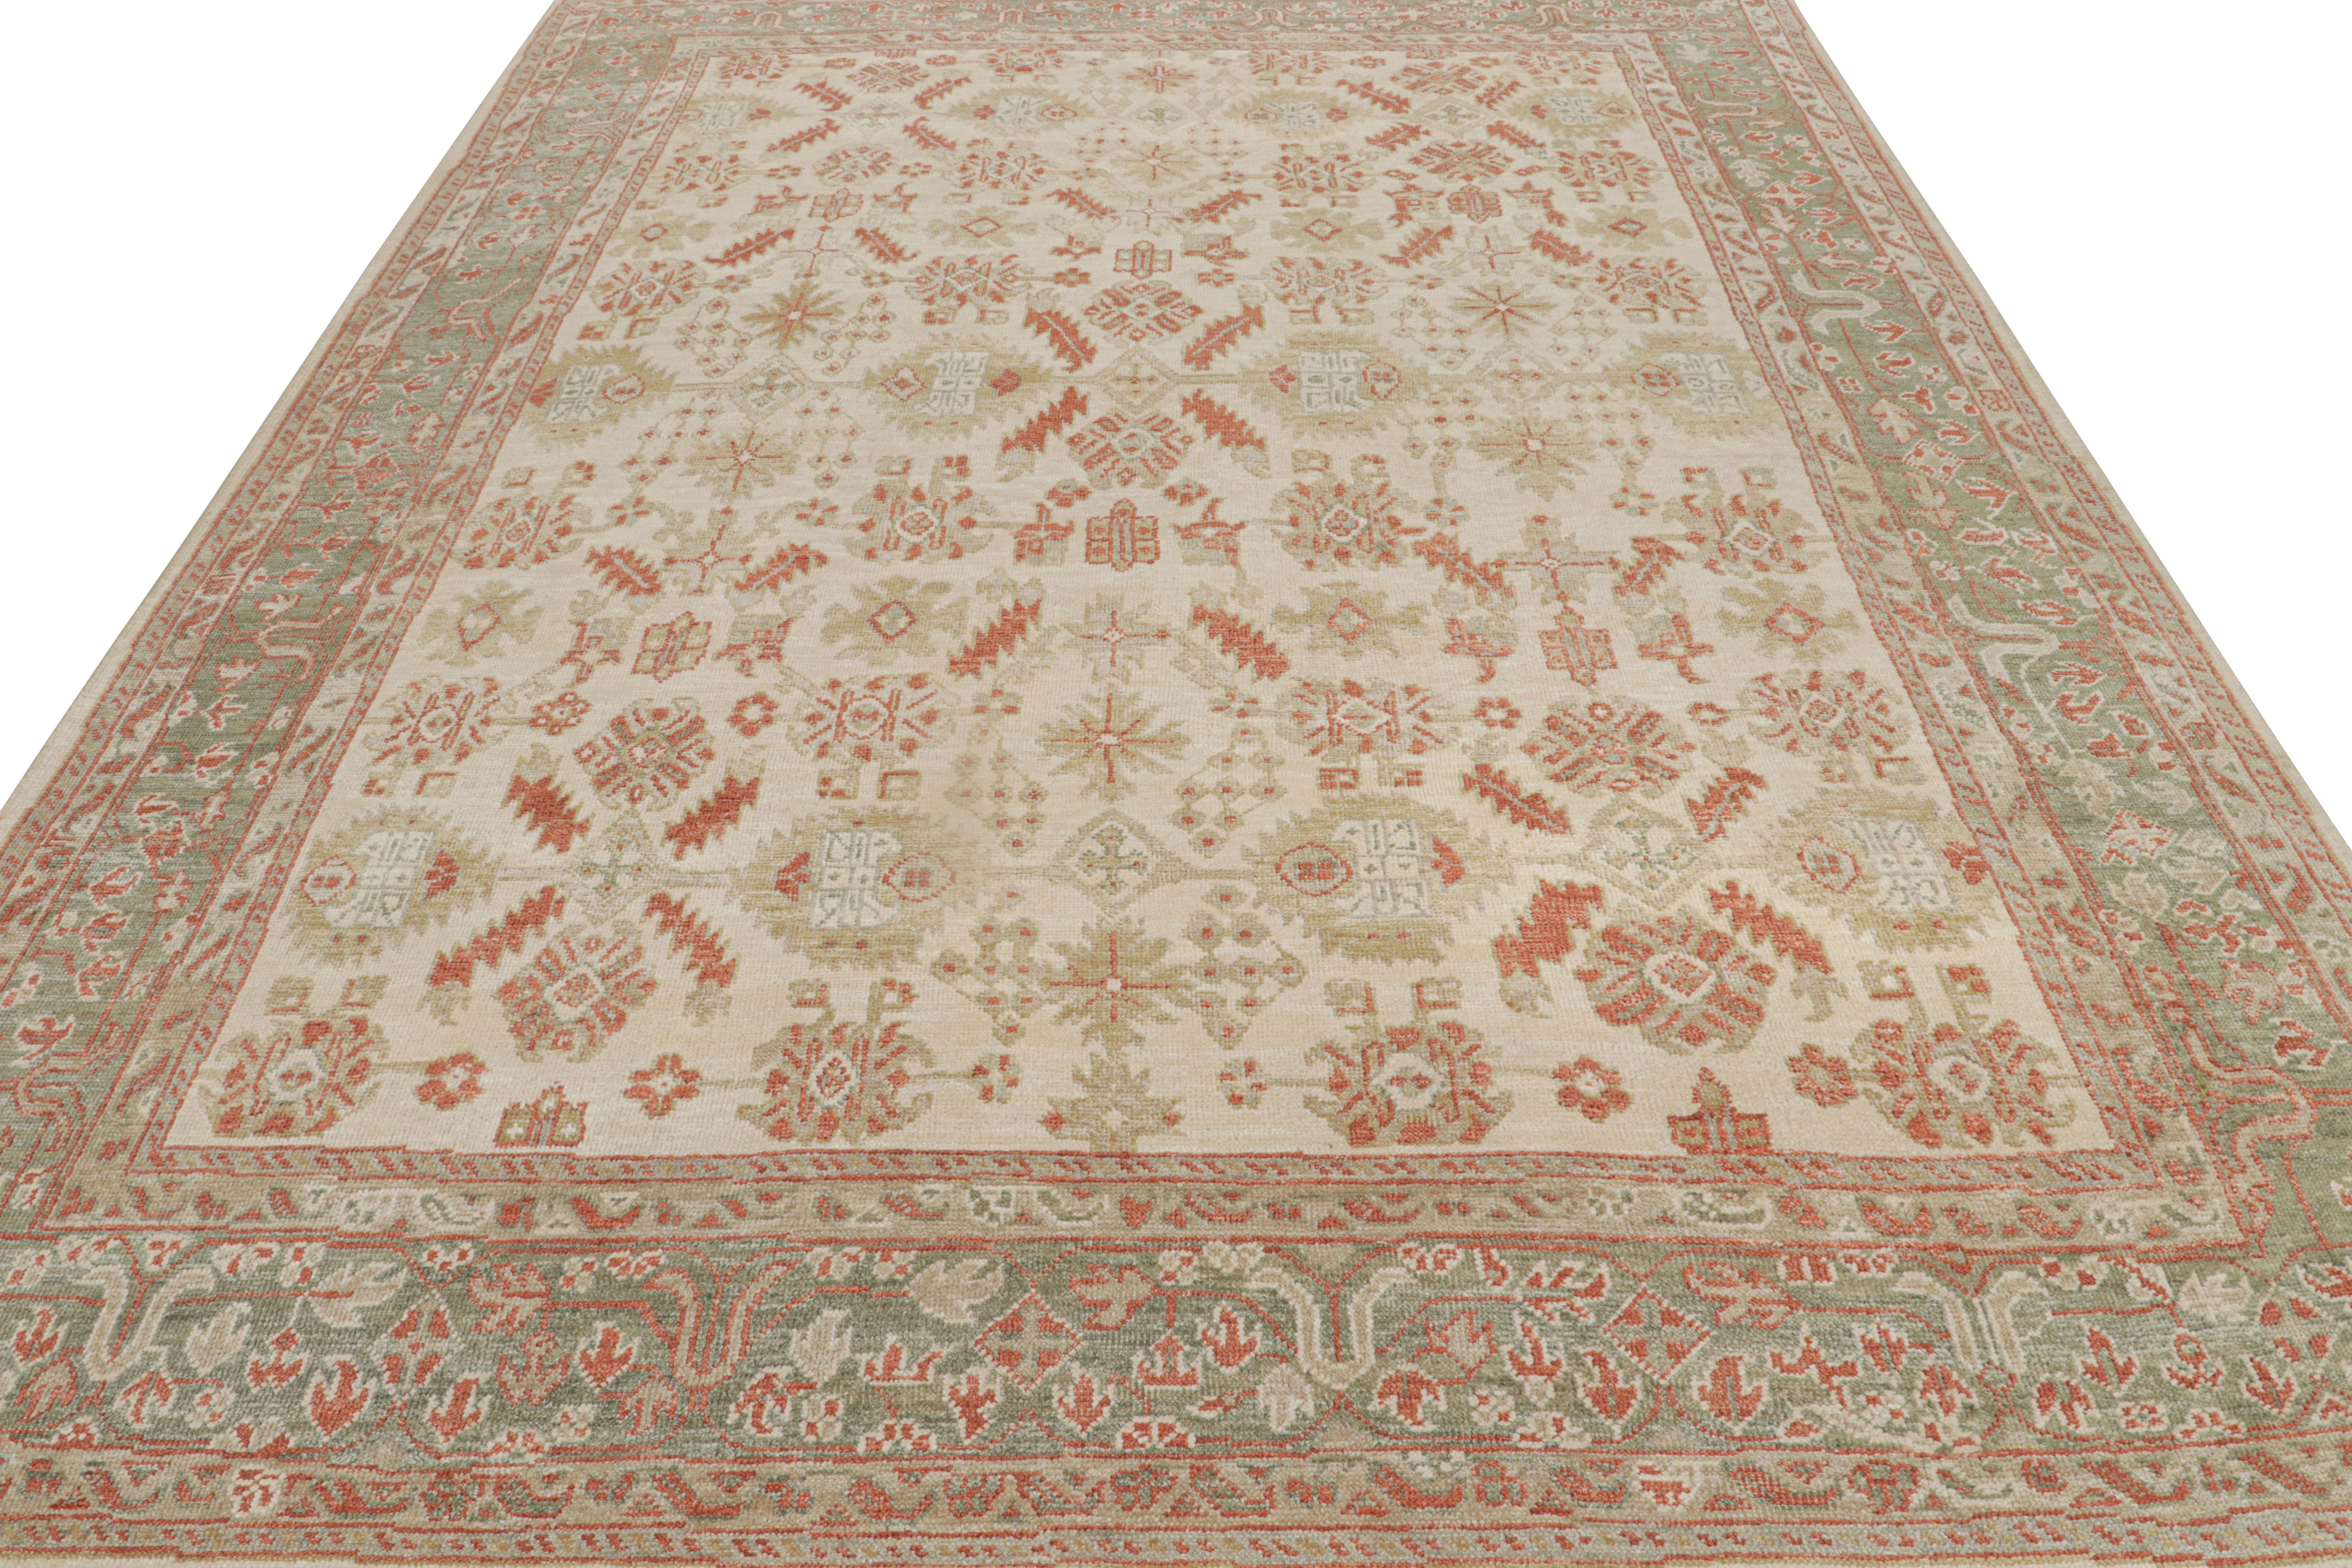 Indian Rug & Kilim’s Oushak Style Rug In Beige-Brown and Red Floral Pattern For Sale